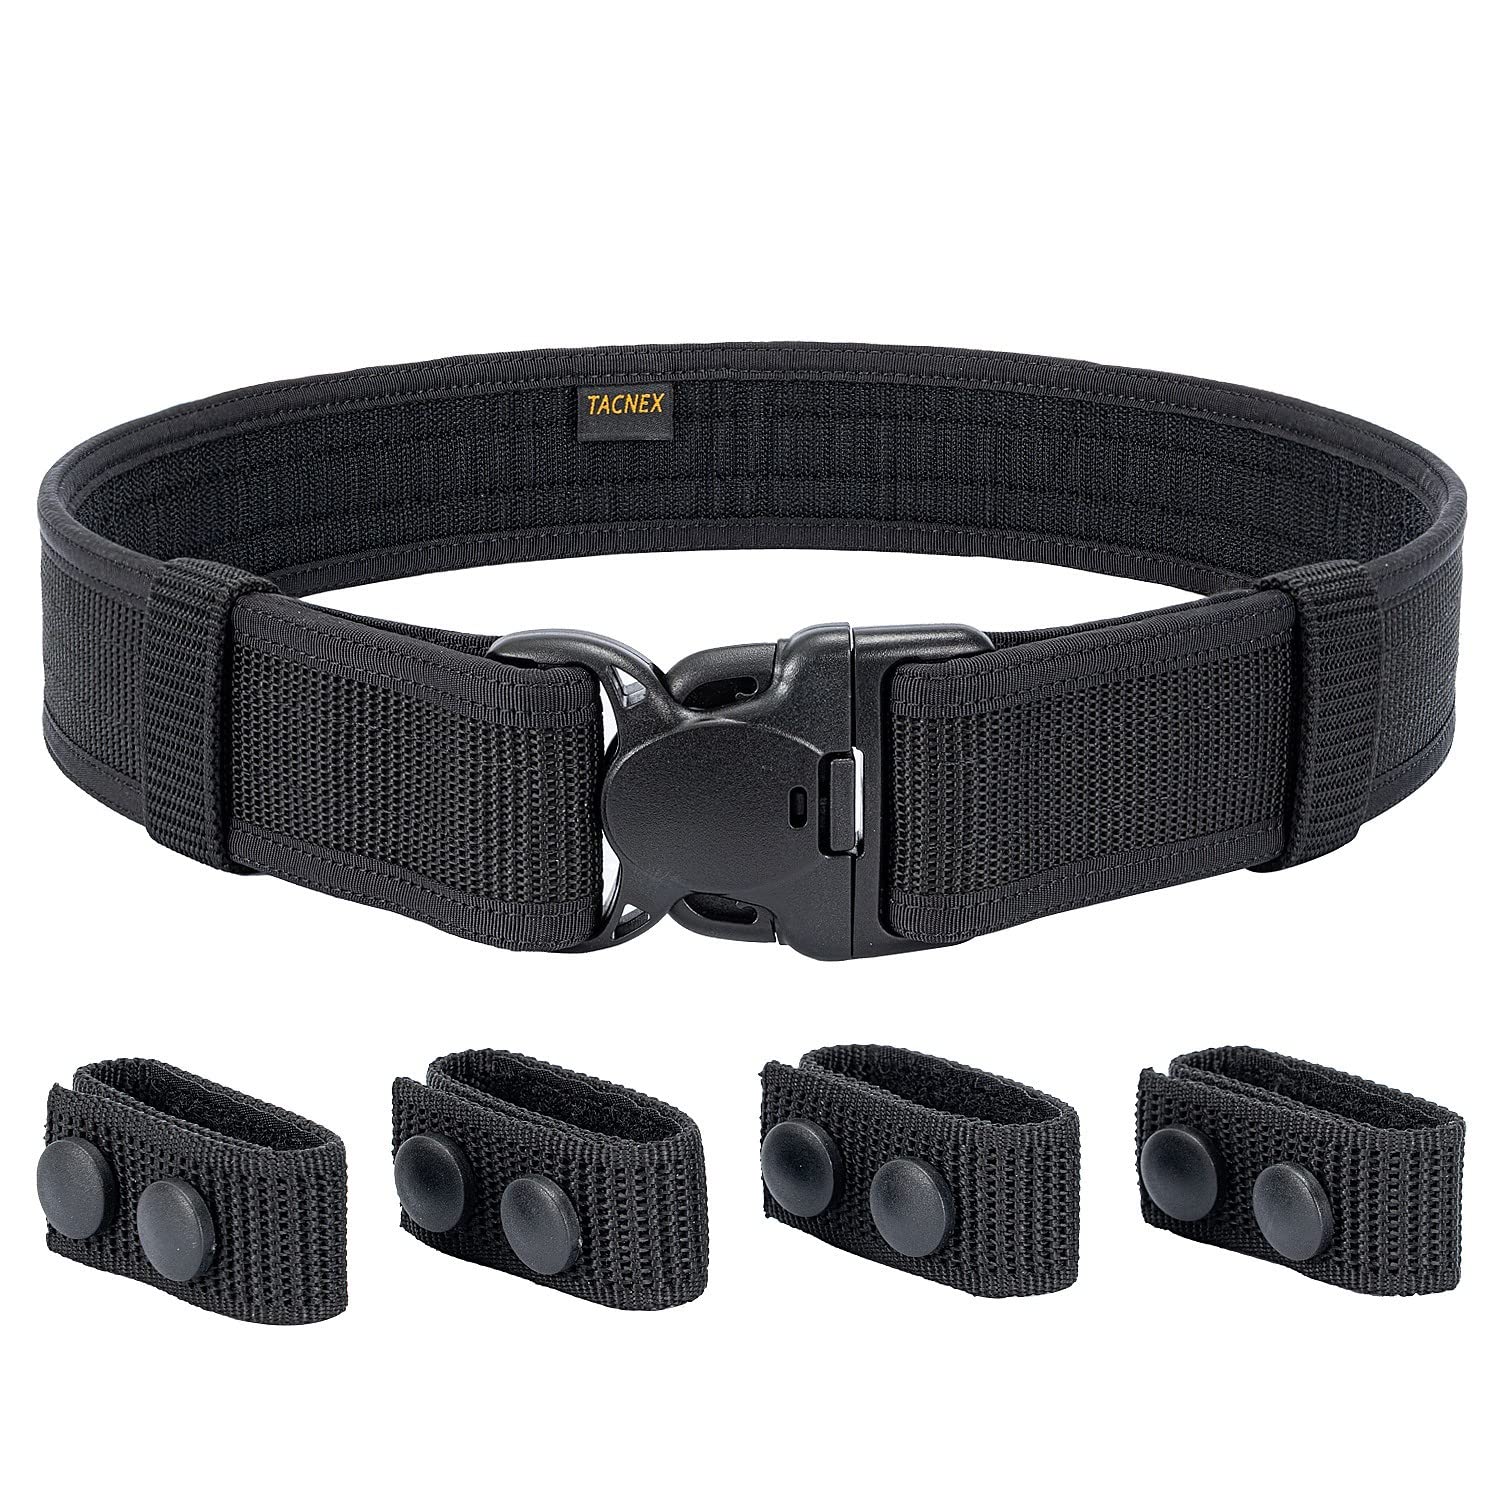 Kore Belt Keepers  Nylon Web Velcro Straps to keep the tip of